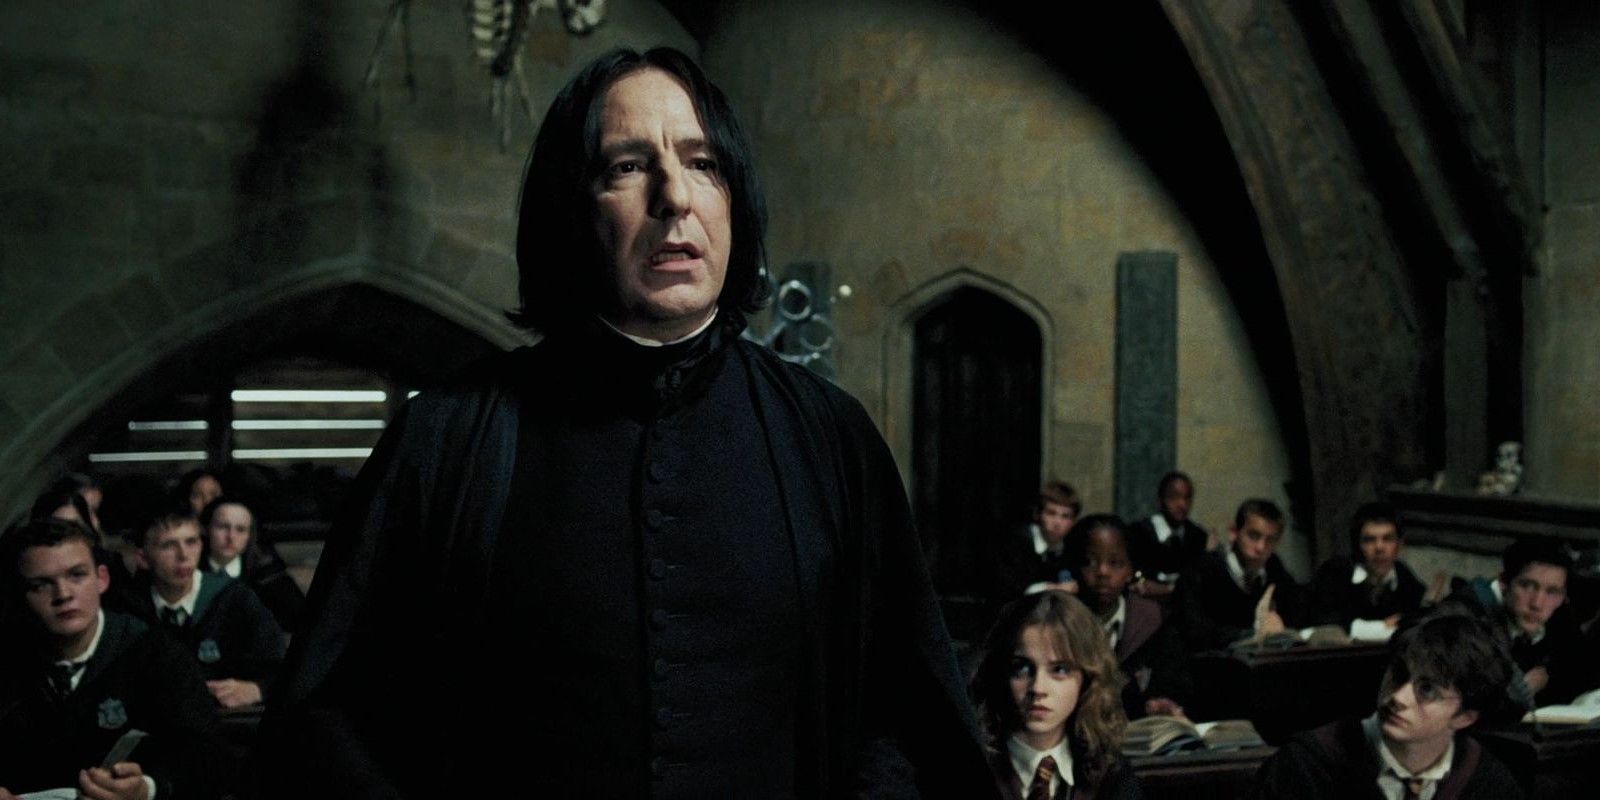 Snape at class in Harry Potter and the Prisoner of Azkaban.